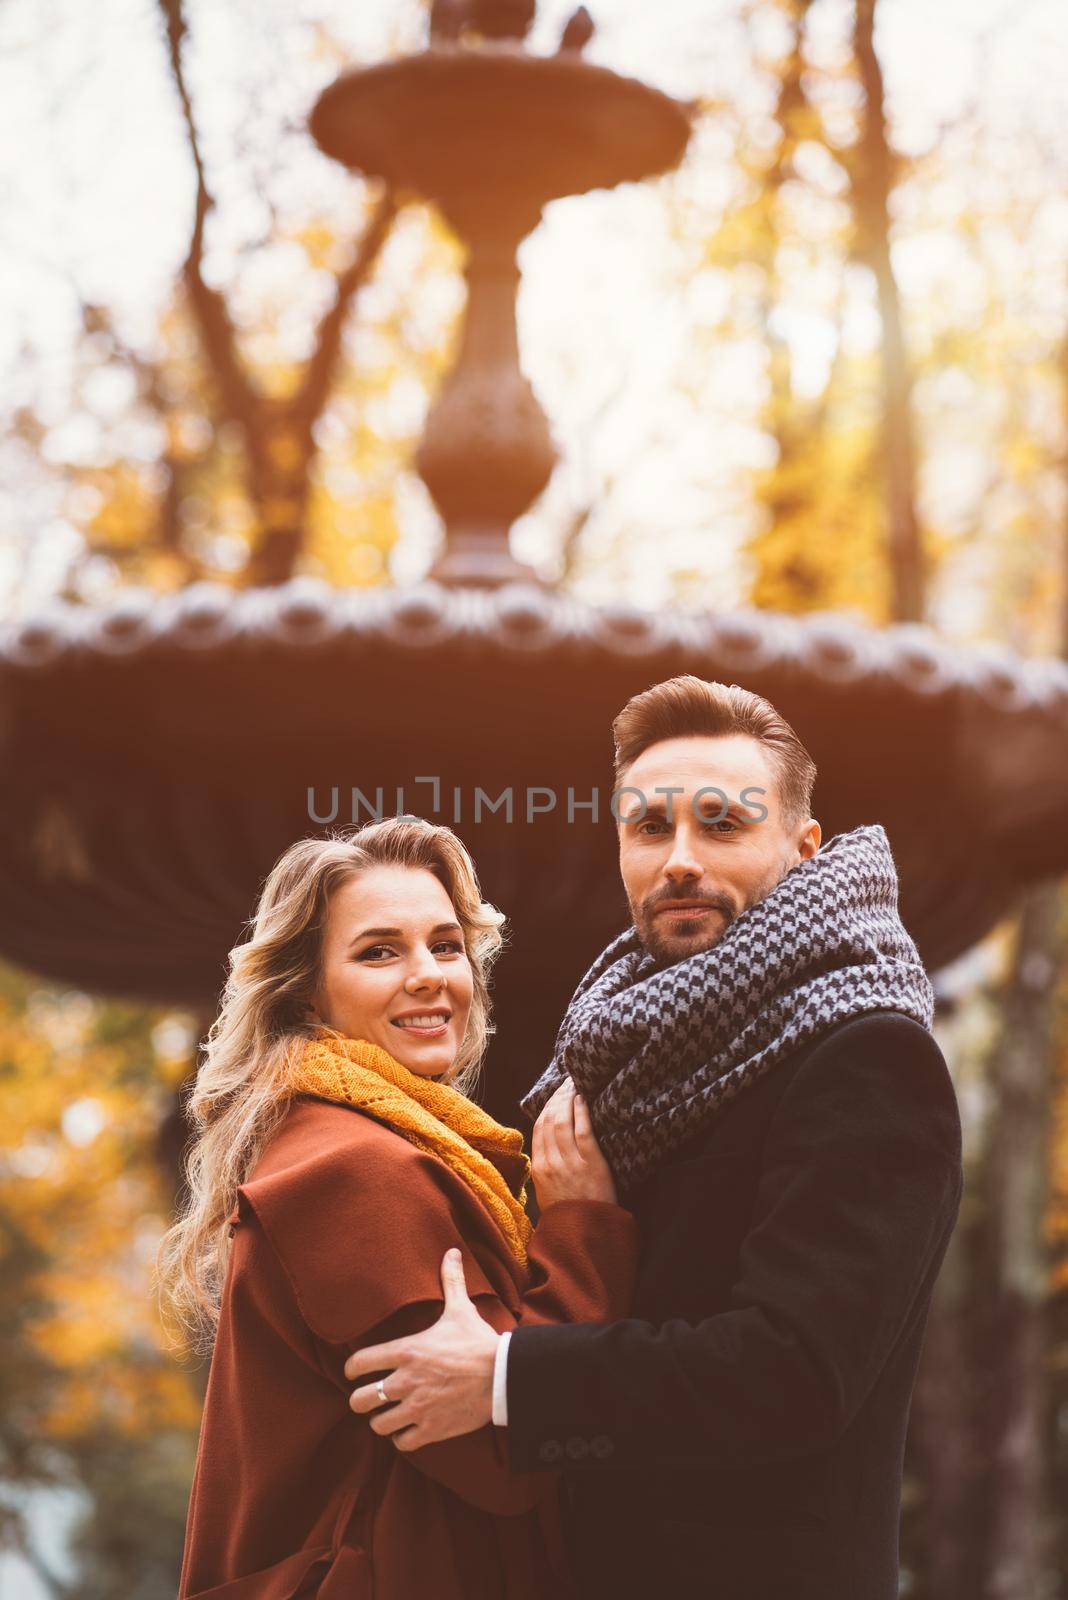 Half-length portrait loving couple of young people standing embracing and looking at camera with an old fountain on background at the autumn park wearing autumn coats. Toned photo.